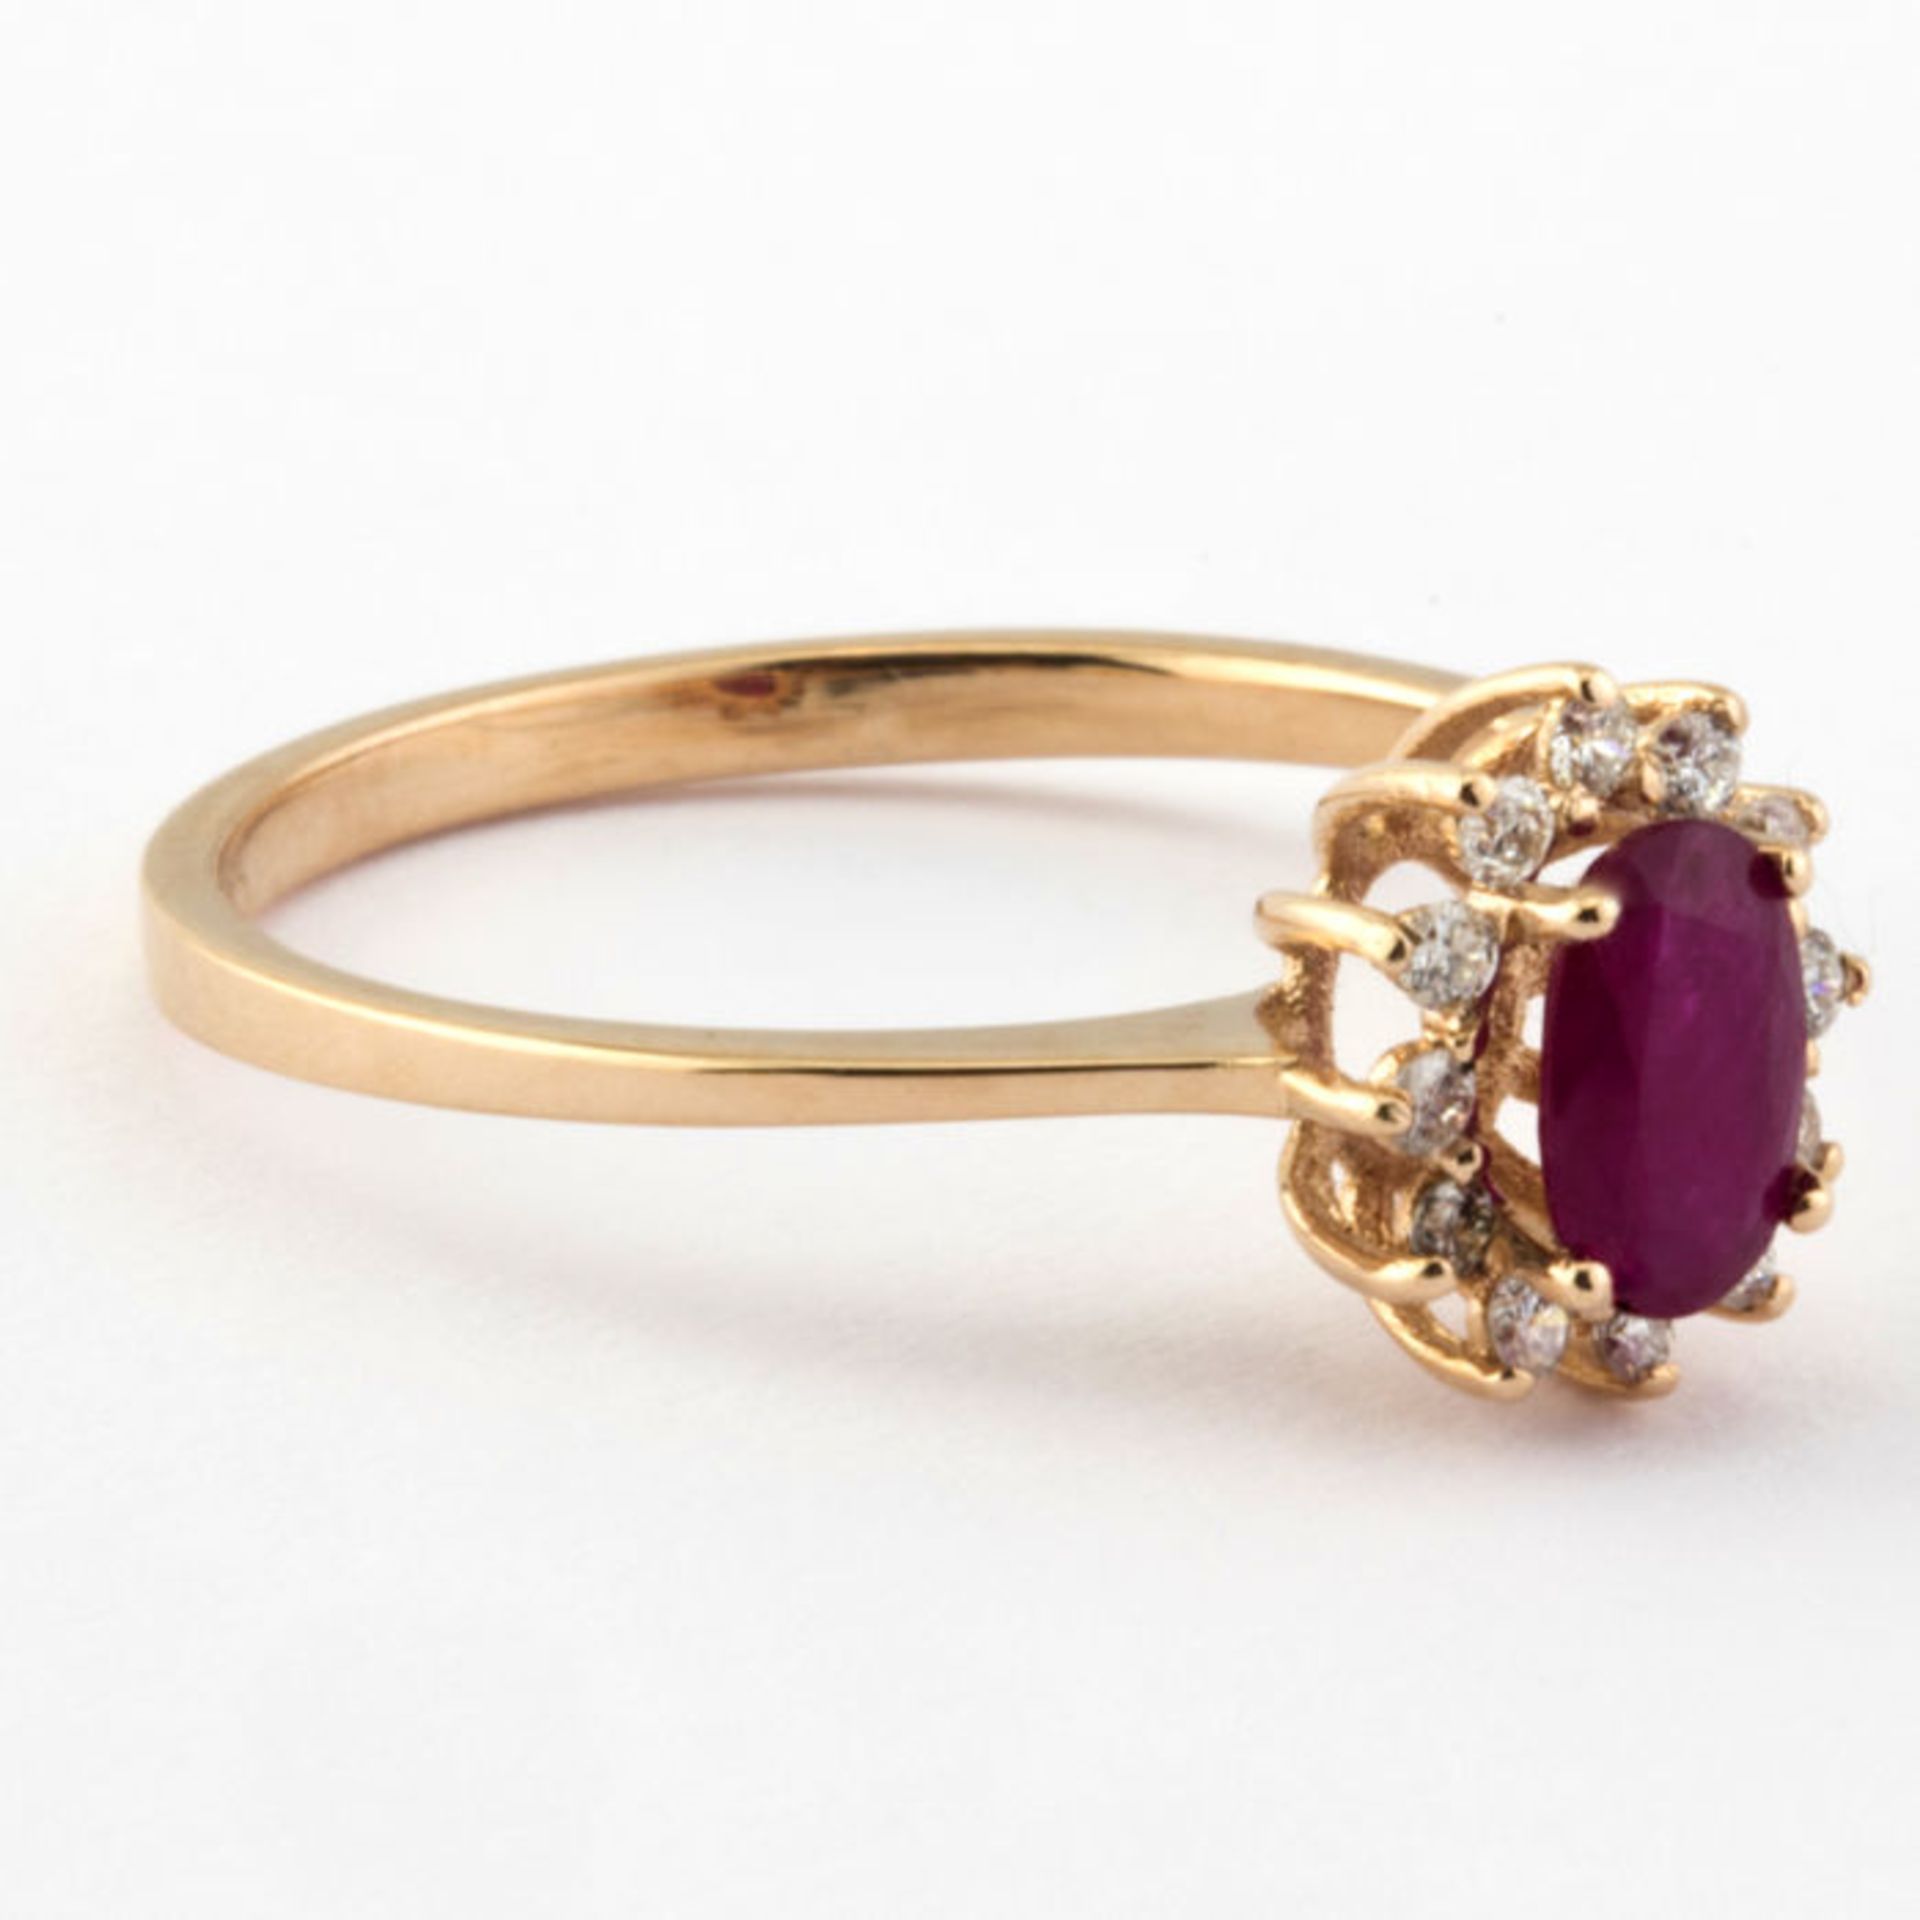 14K Pink Gold Cluster Ring Total:0,65ct,12 Pcs Brilliant Cut Round Diamond and 1 Natural Ruby - Image 3 of 6